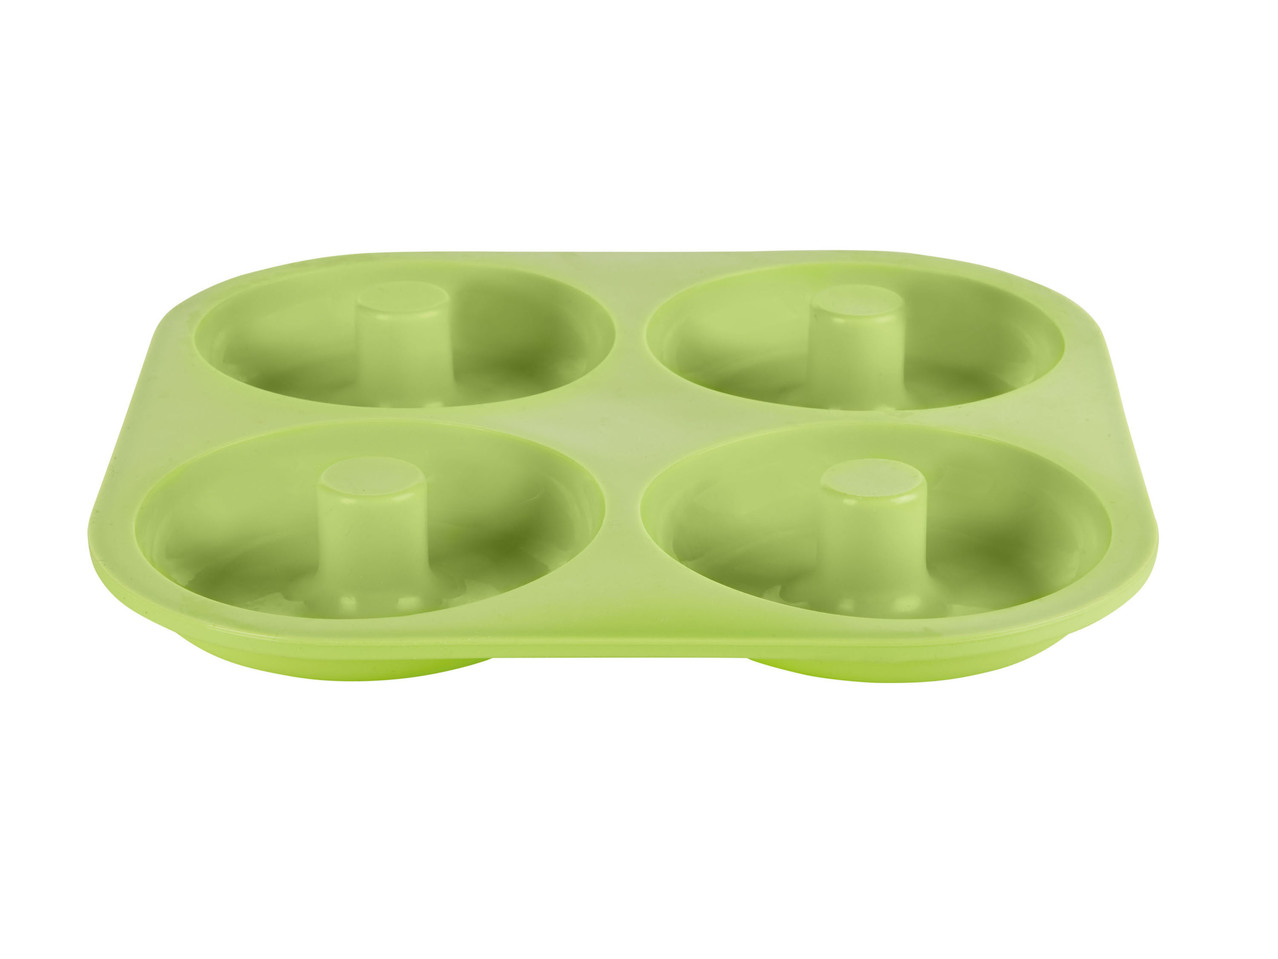 Bread Mould, Bagel Mould or Silicone Baking Mat